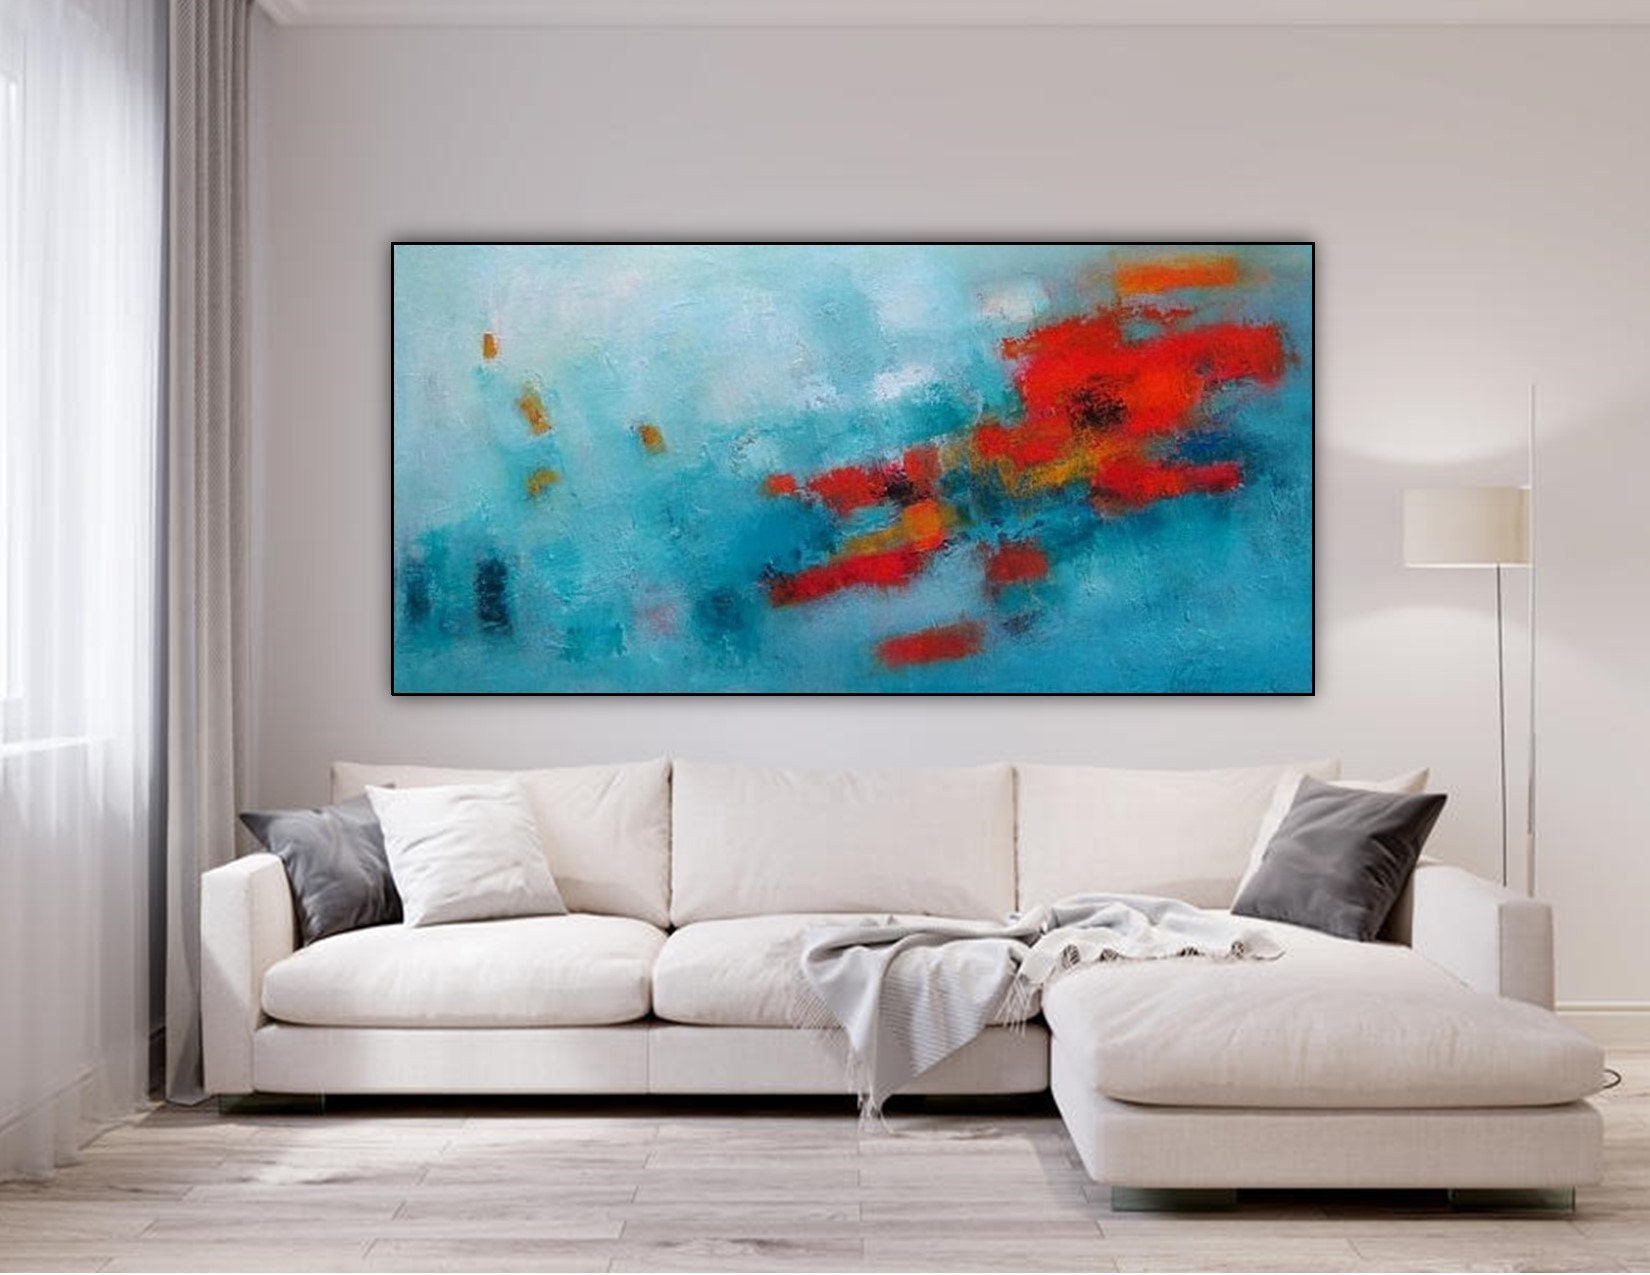 Water Splash ABSTRACT  Canvas Art Print Box Framed Picture Wall Hanging BBD 